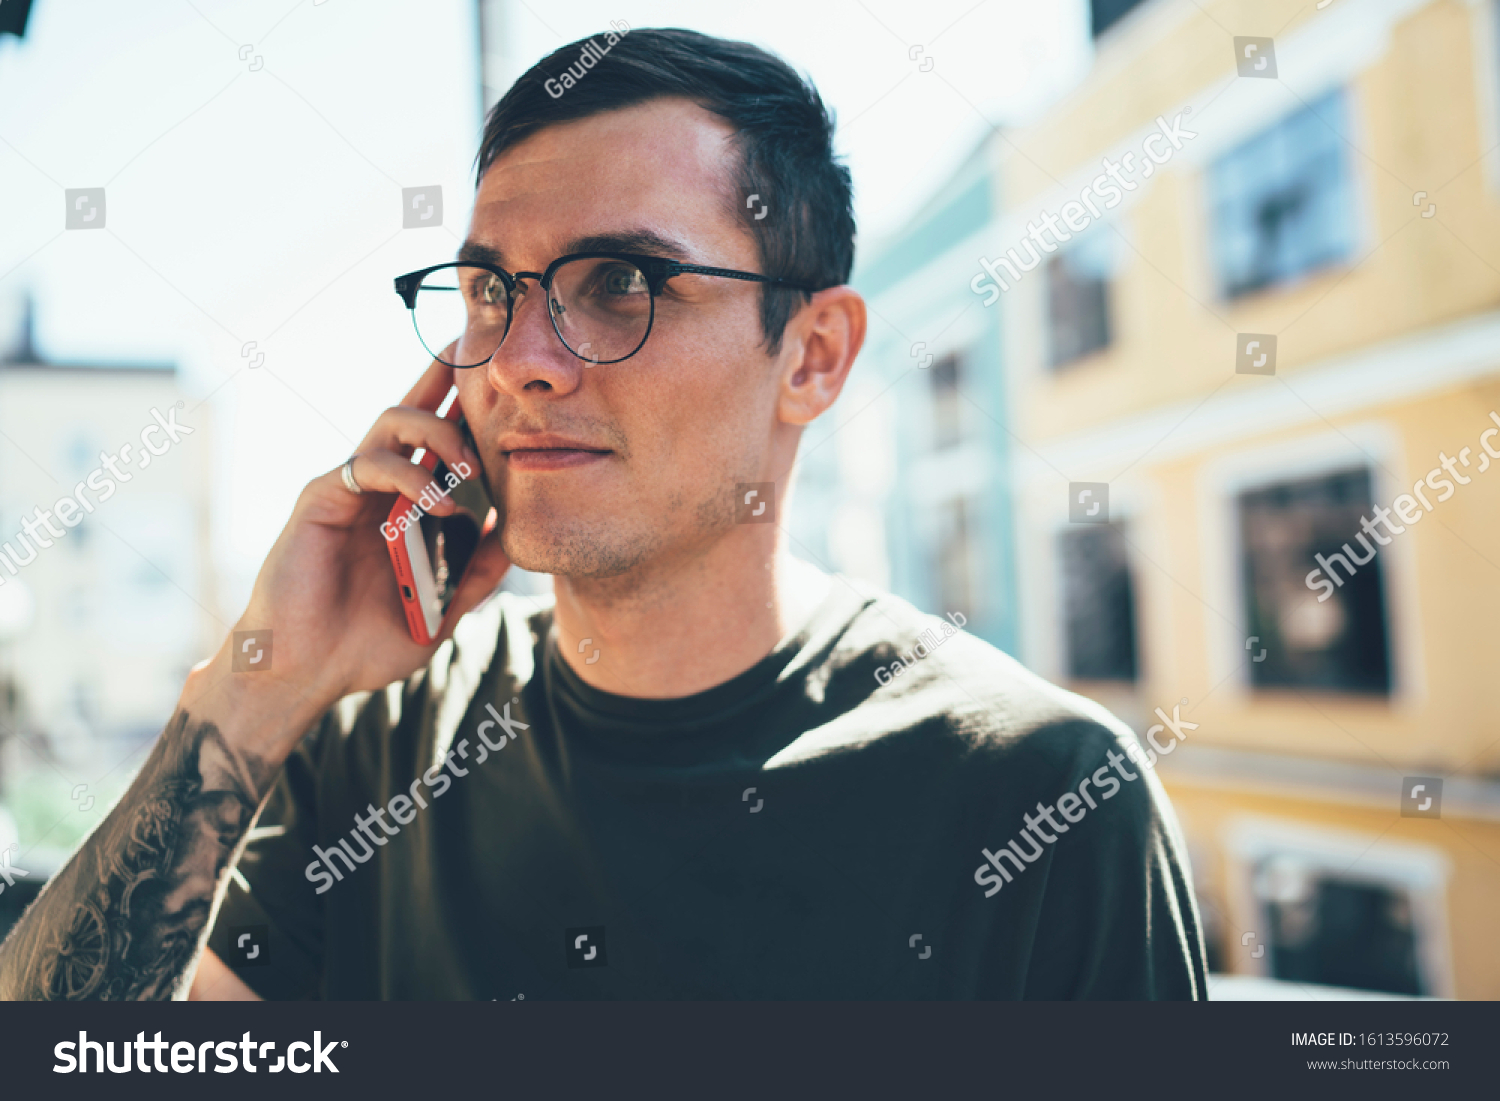 Concentrated young cool male in casual wear and glasses with tattoo using smartphone for discussion with coworker collaborative project listening ideas #1613596072